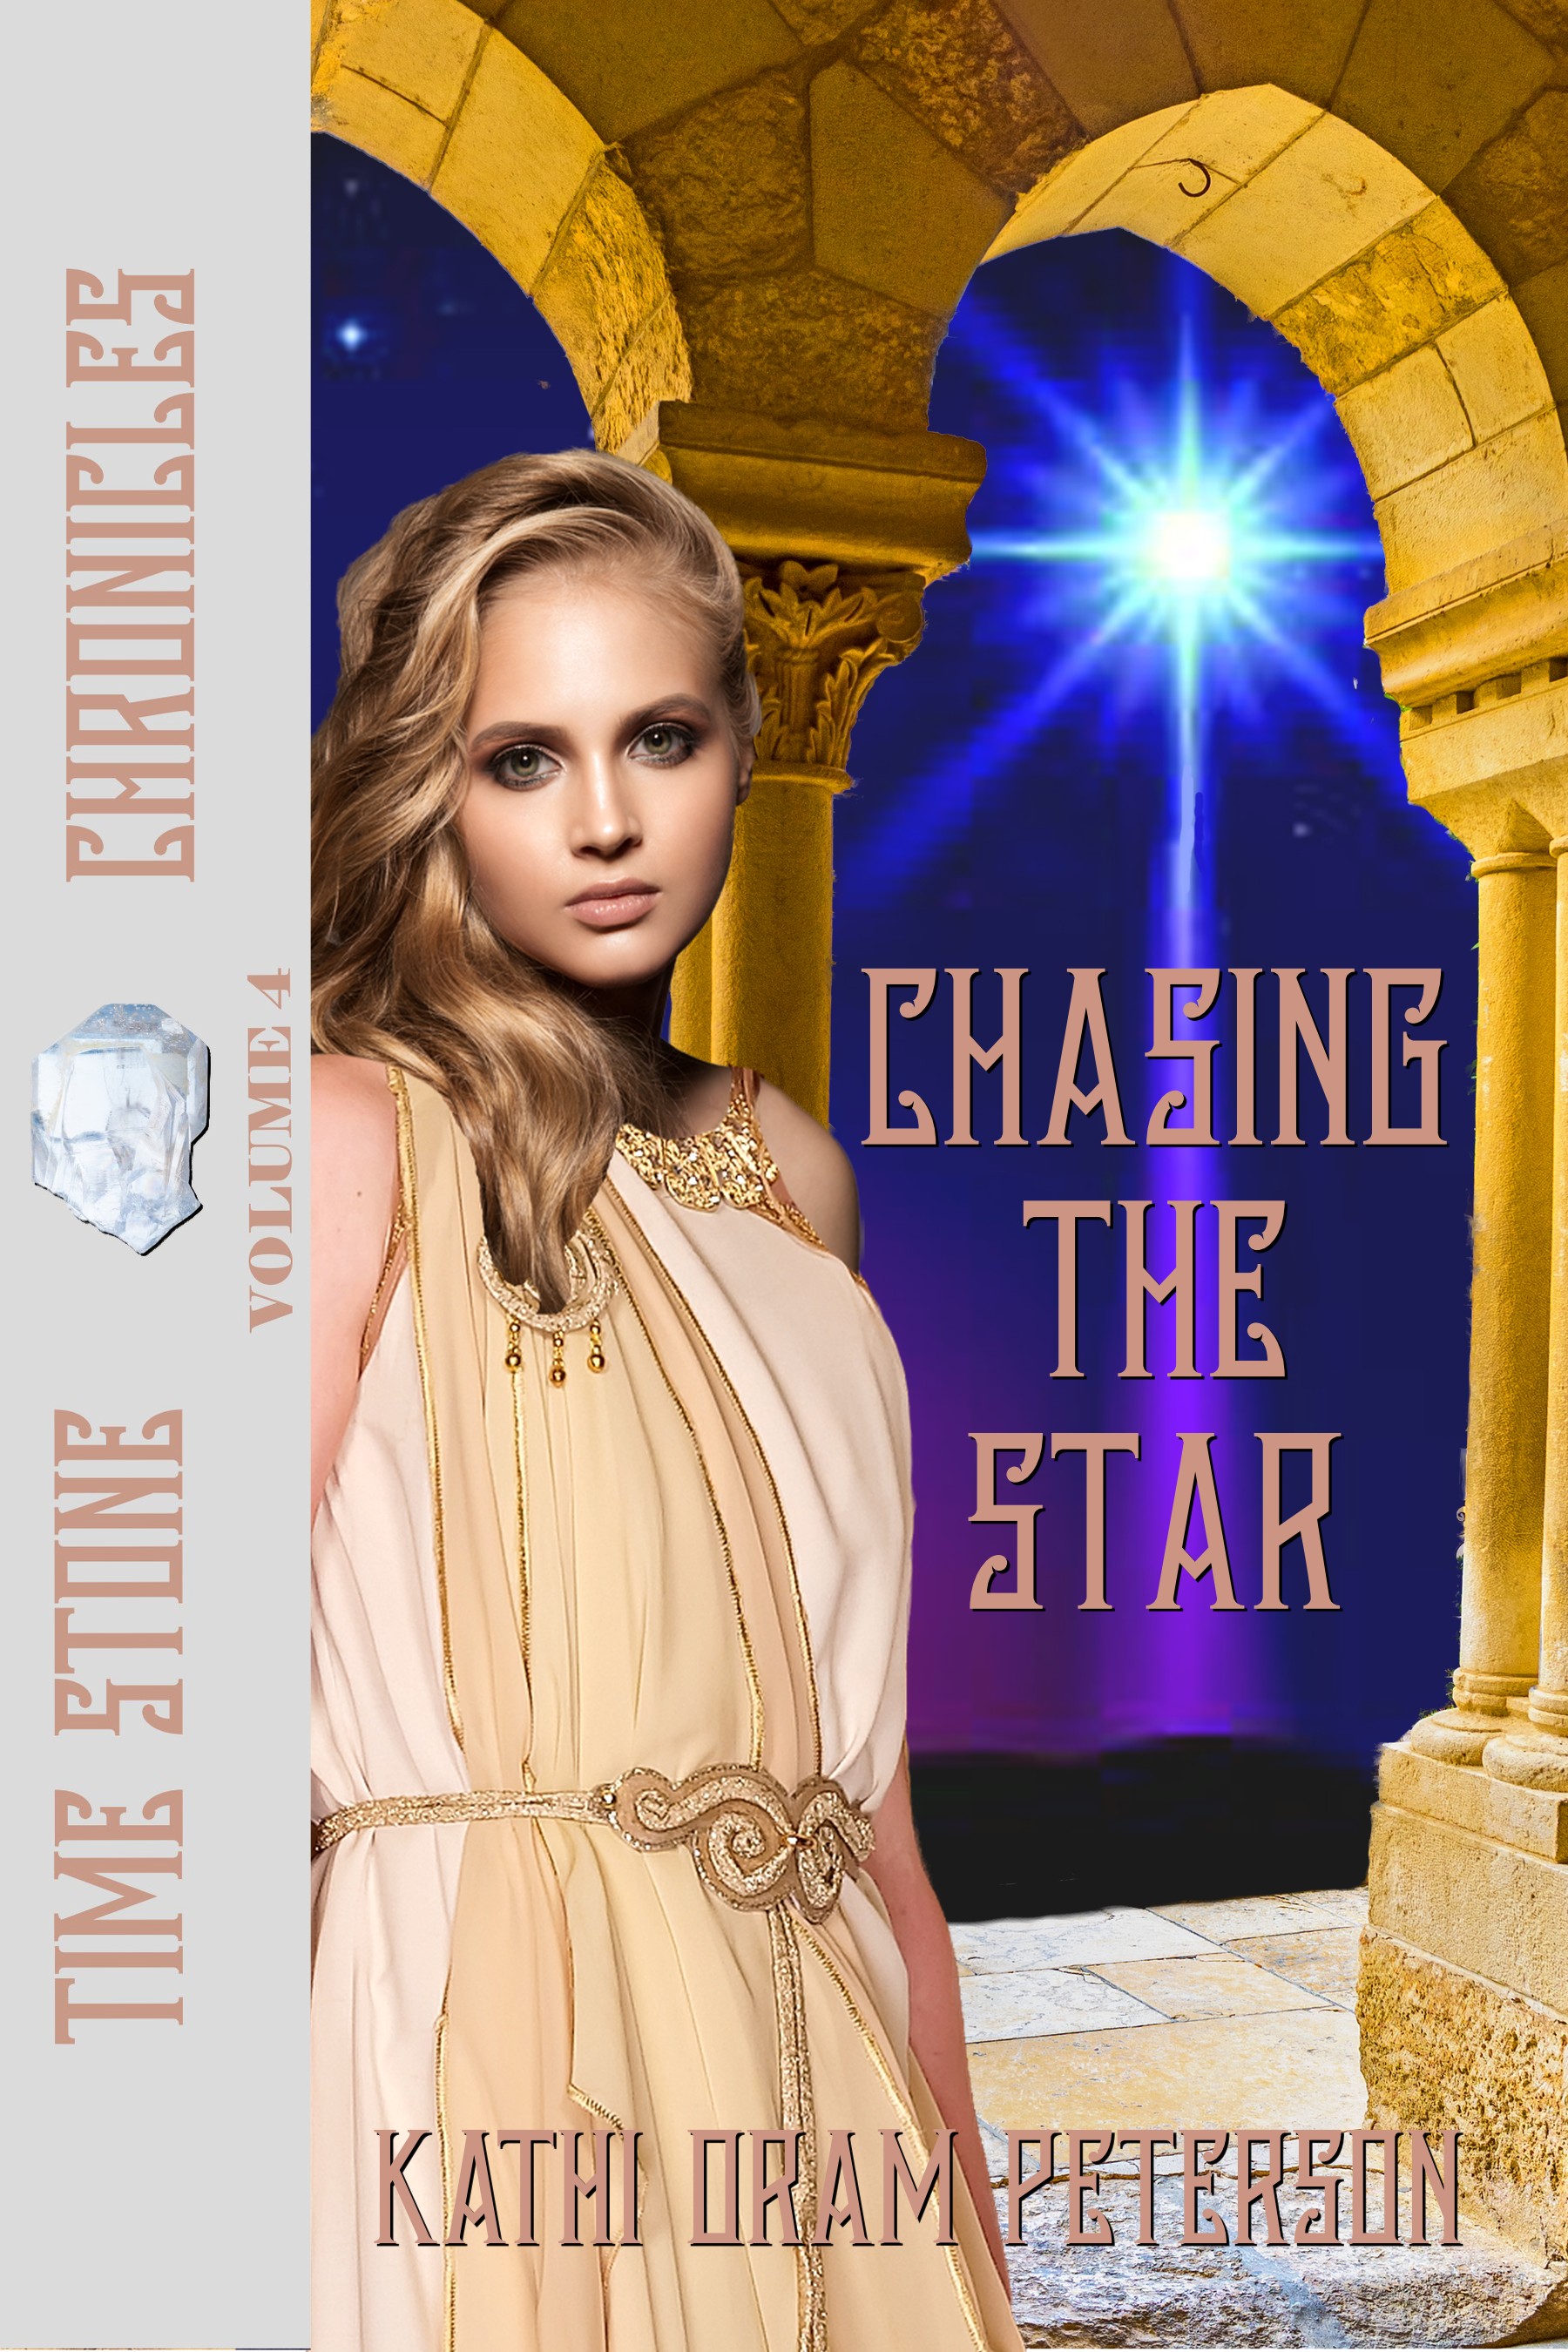 Chasing the Star (Time Stone Chronicles Book 4)